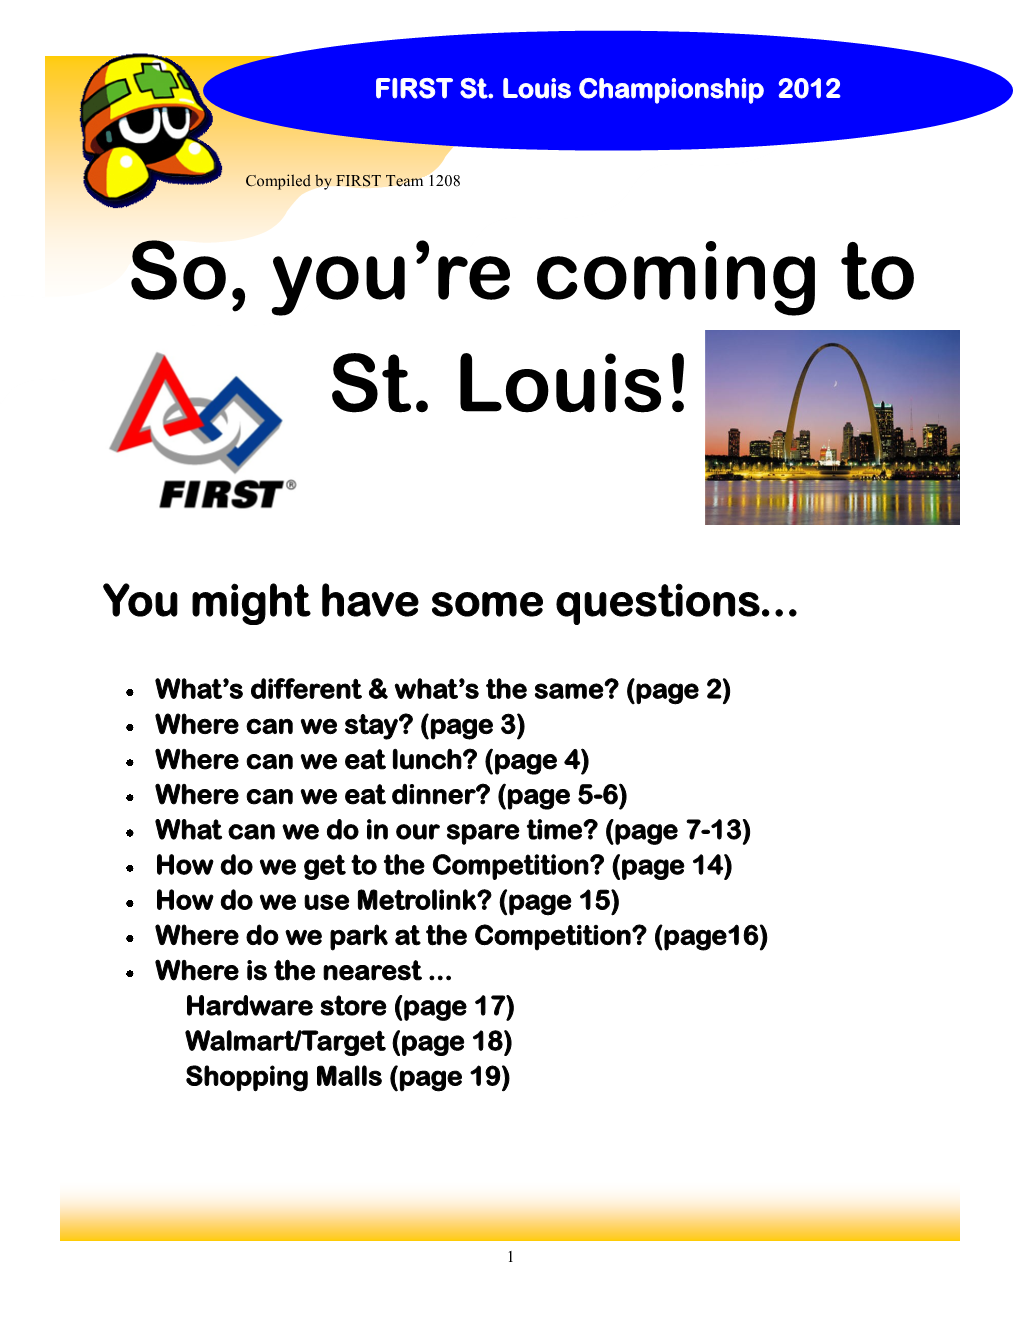 So, You're Coming to St. Louis!